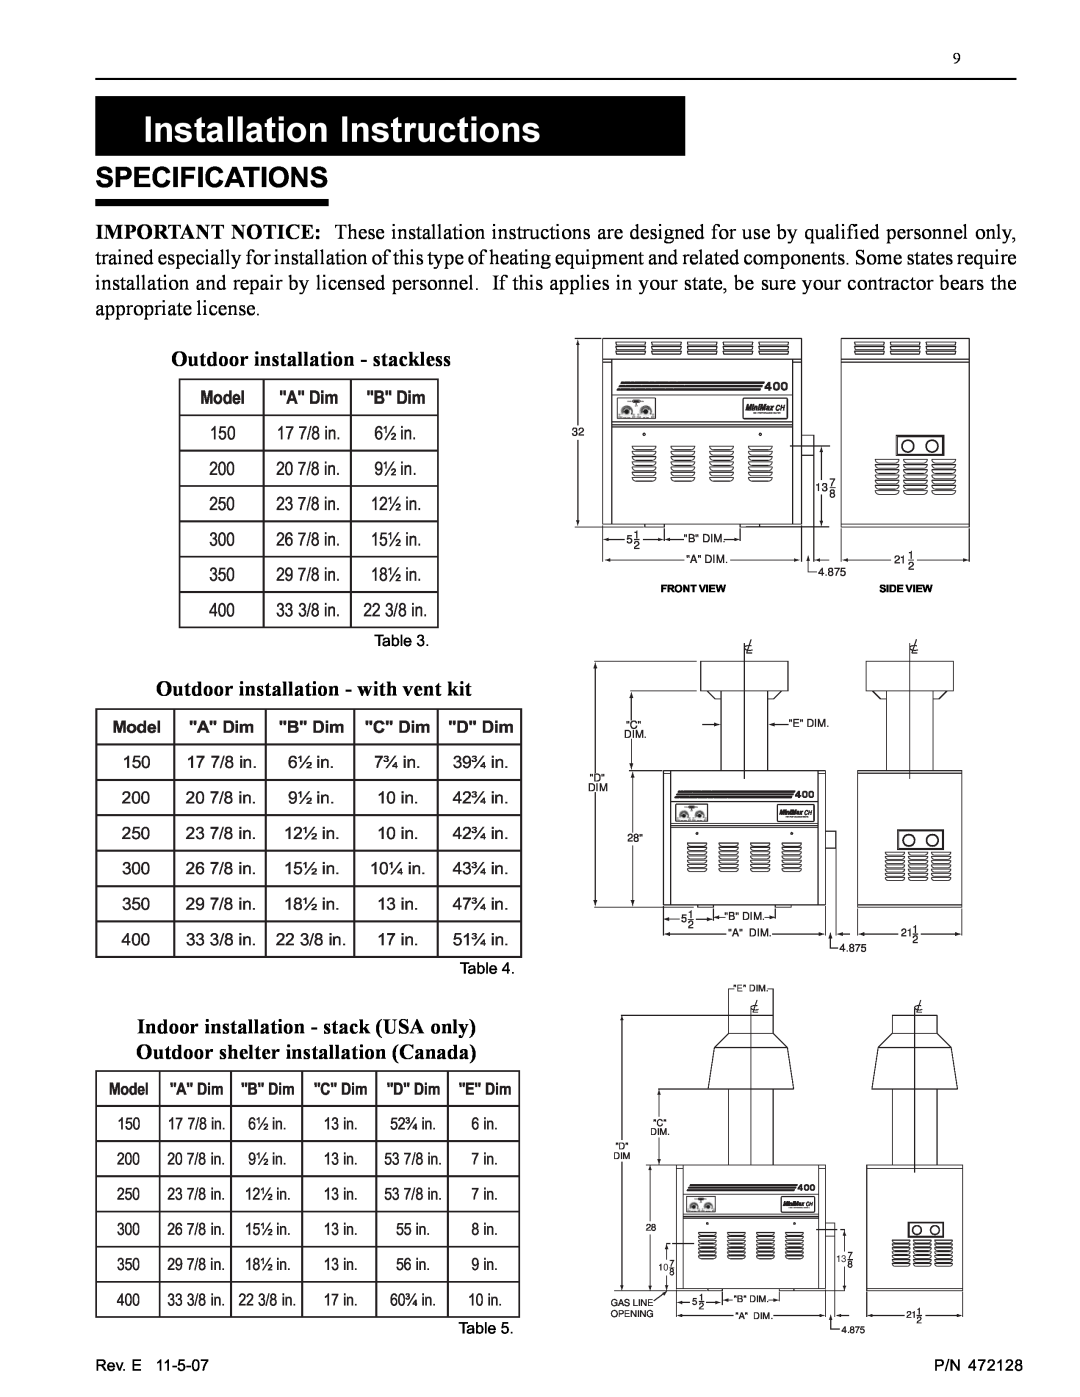 Pentair Hot Tub manual Installation Instructions, Specifications, Outdoor installation - stackless 